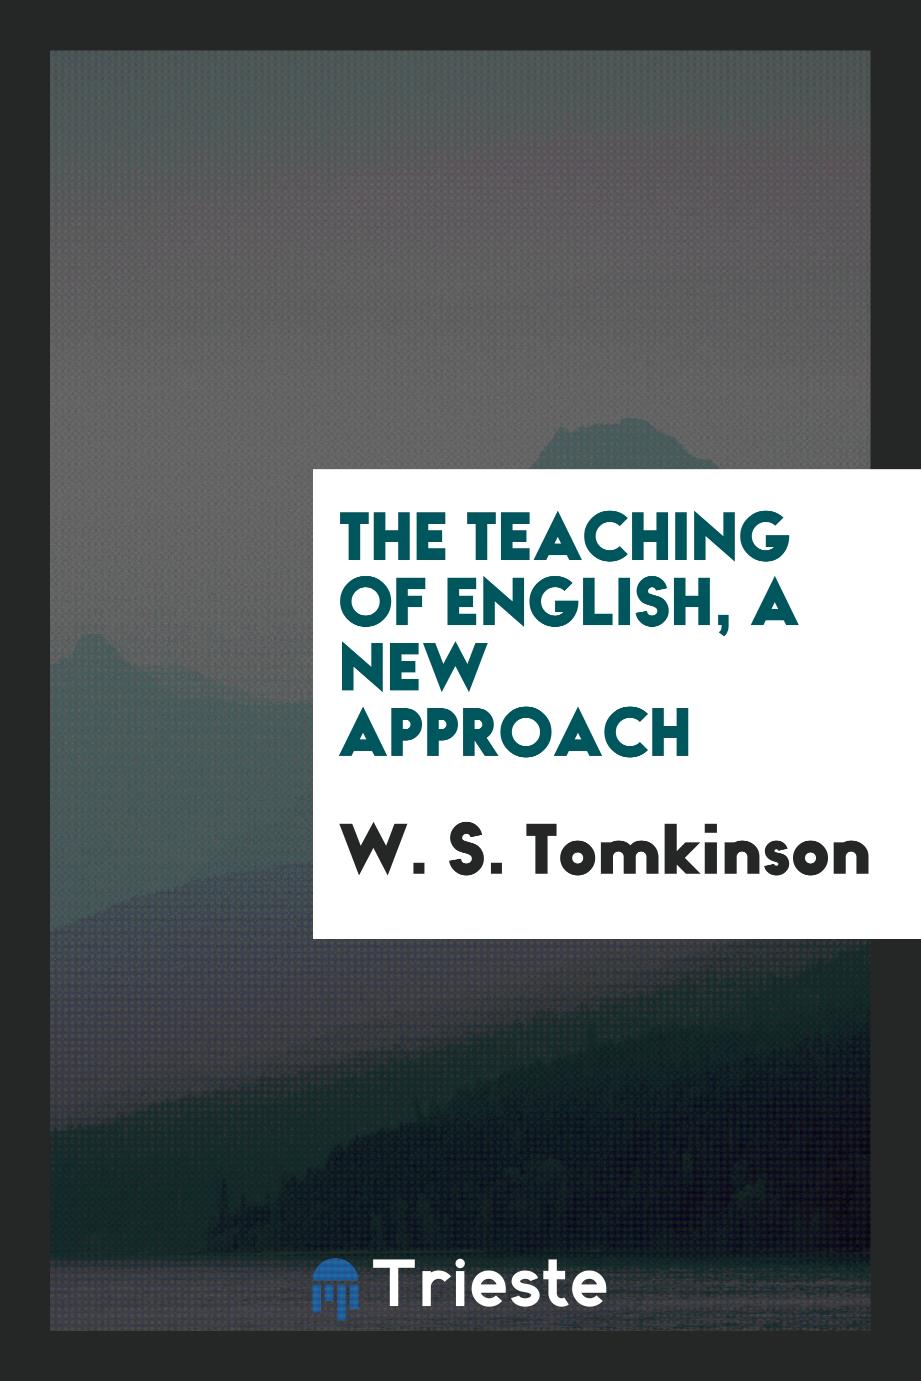 The teaching of English, a new approach